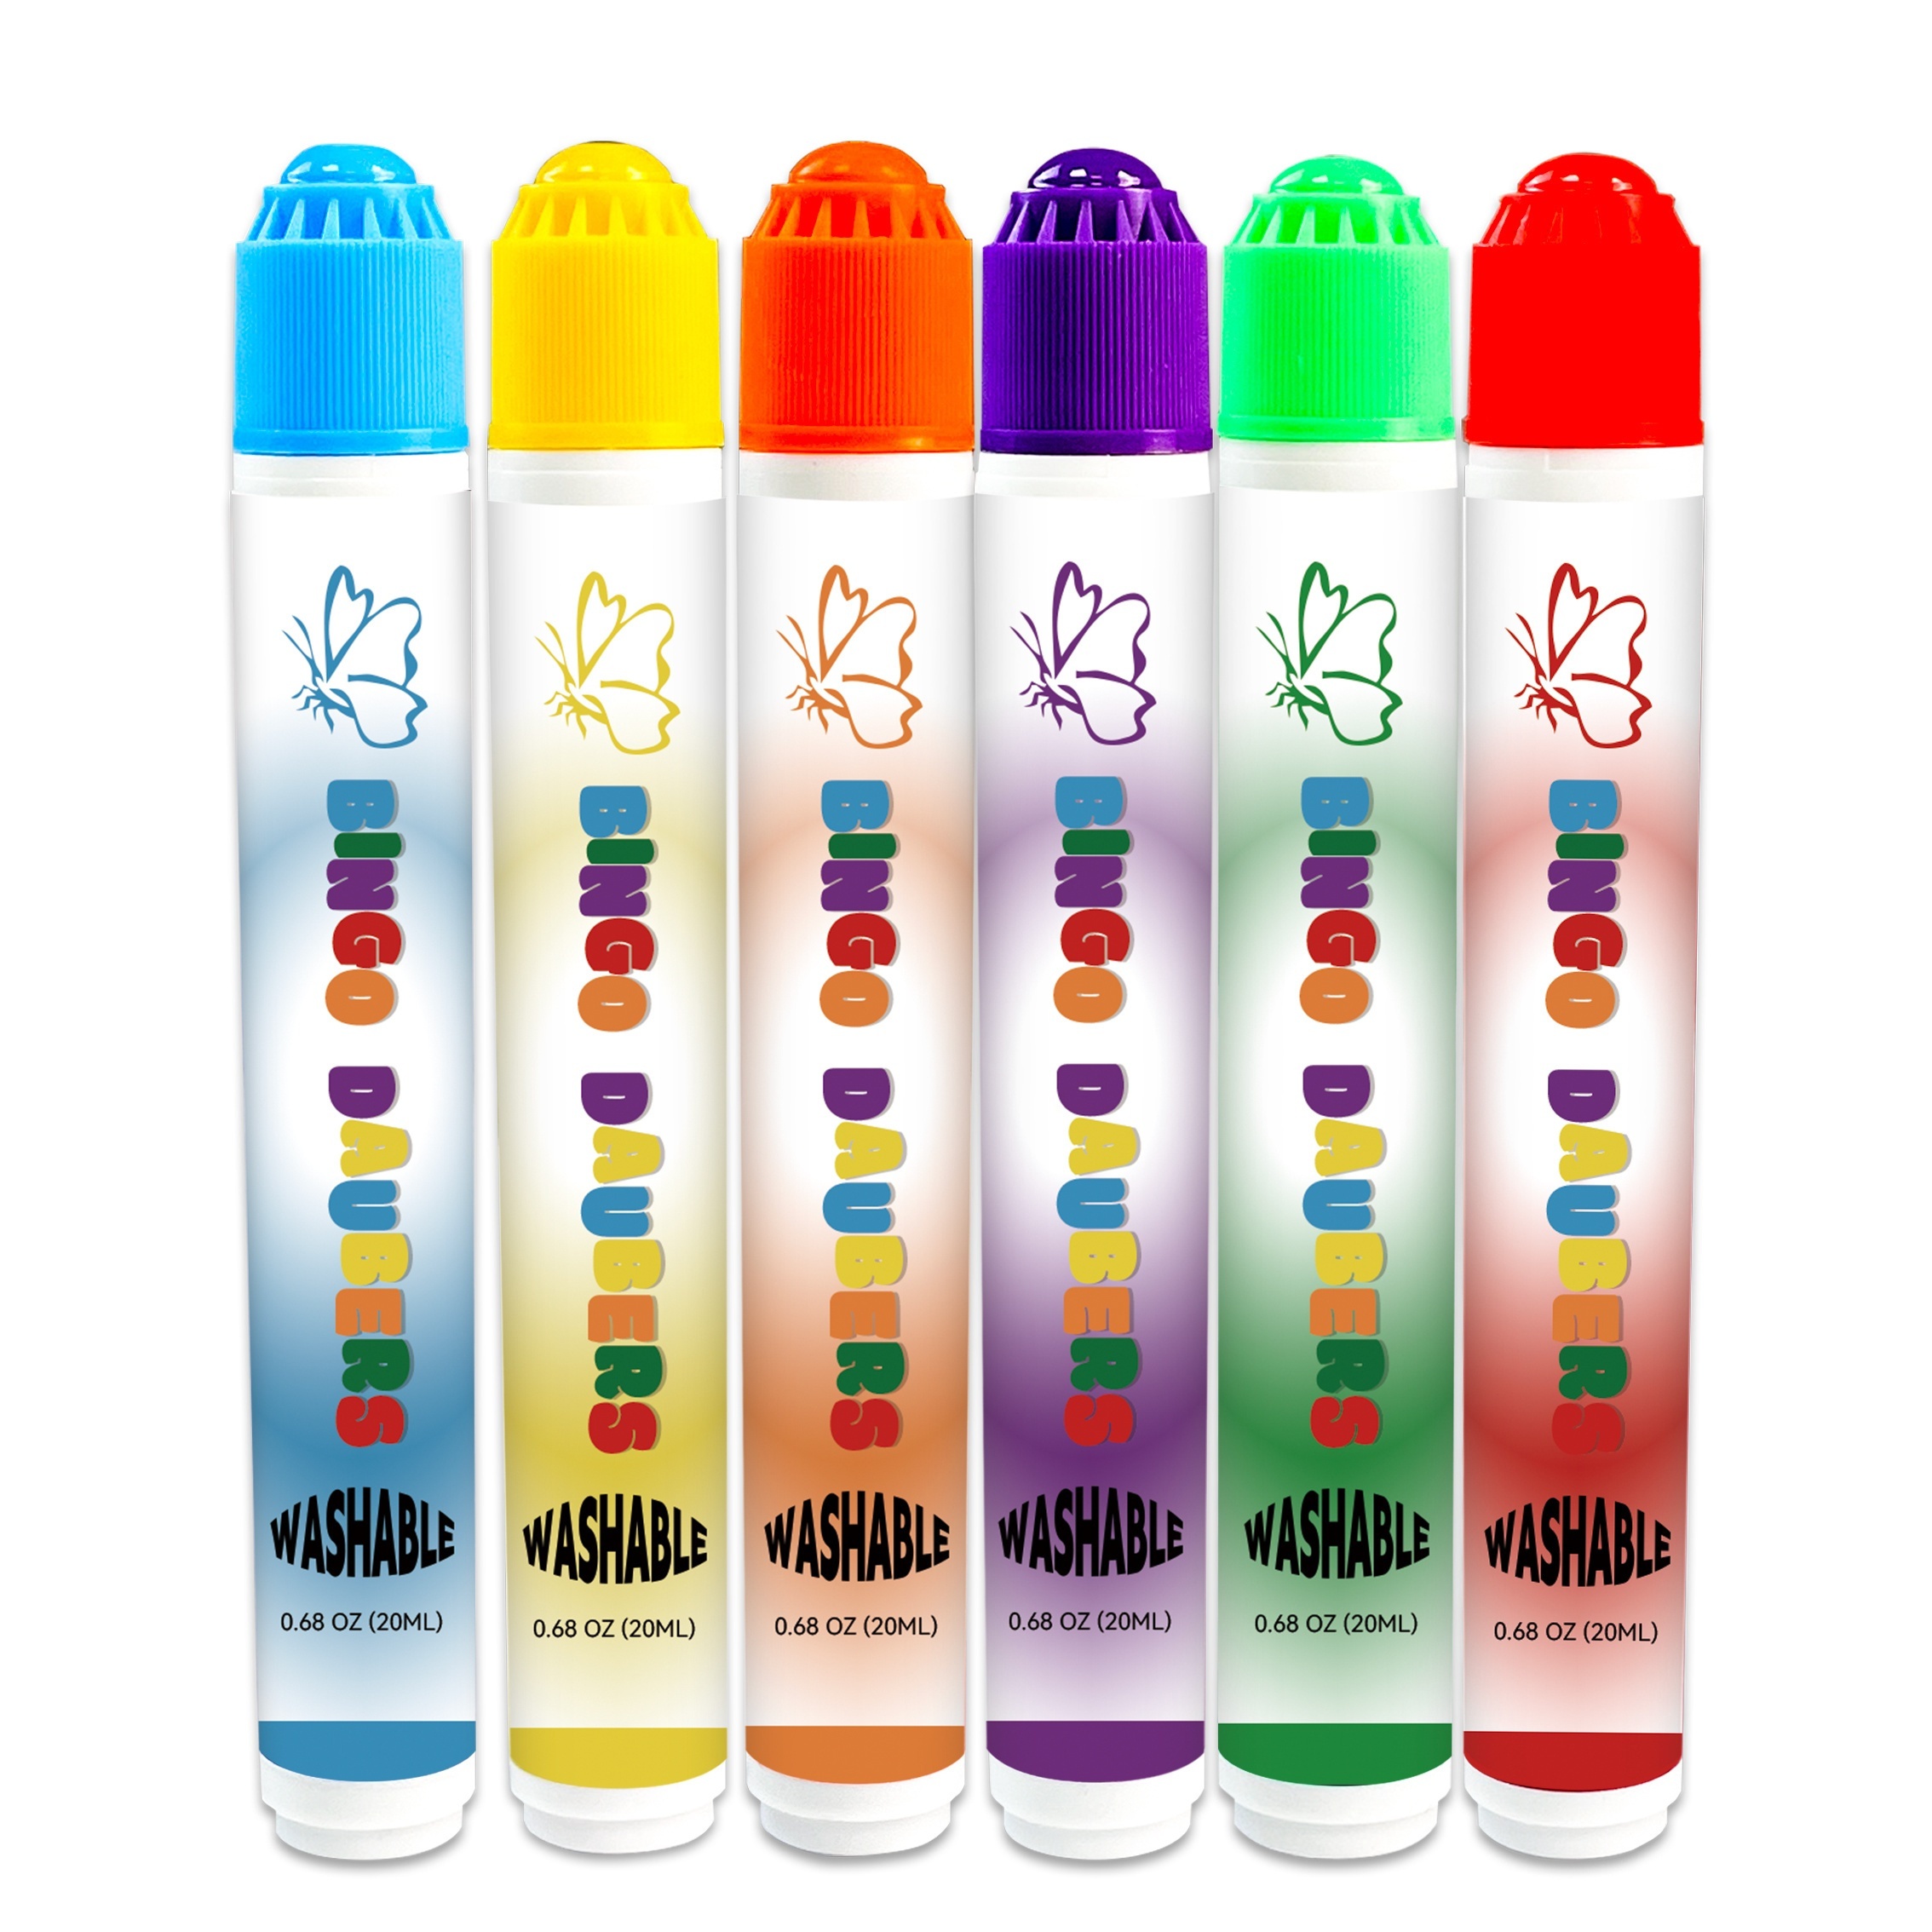 

6 Colors Dot Markers, Mini Dot Markers, Washable, Acid-free Bingo Daubers For Party, - Set Of 6 Bright Colors, Activity